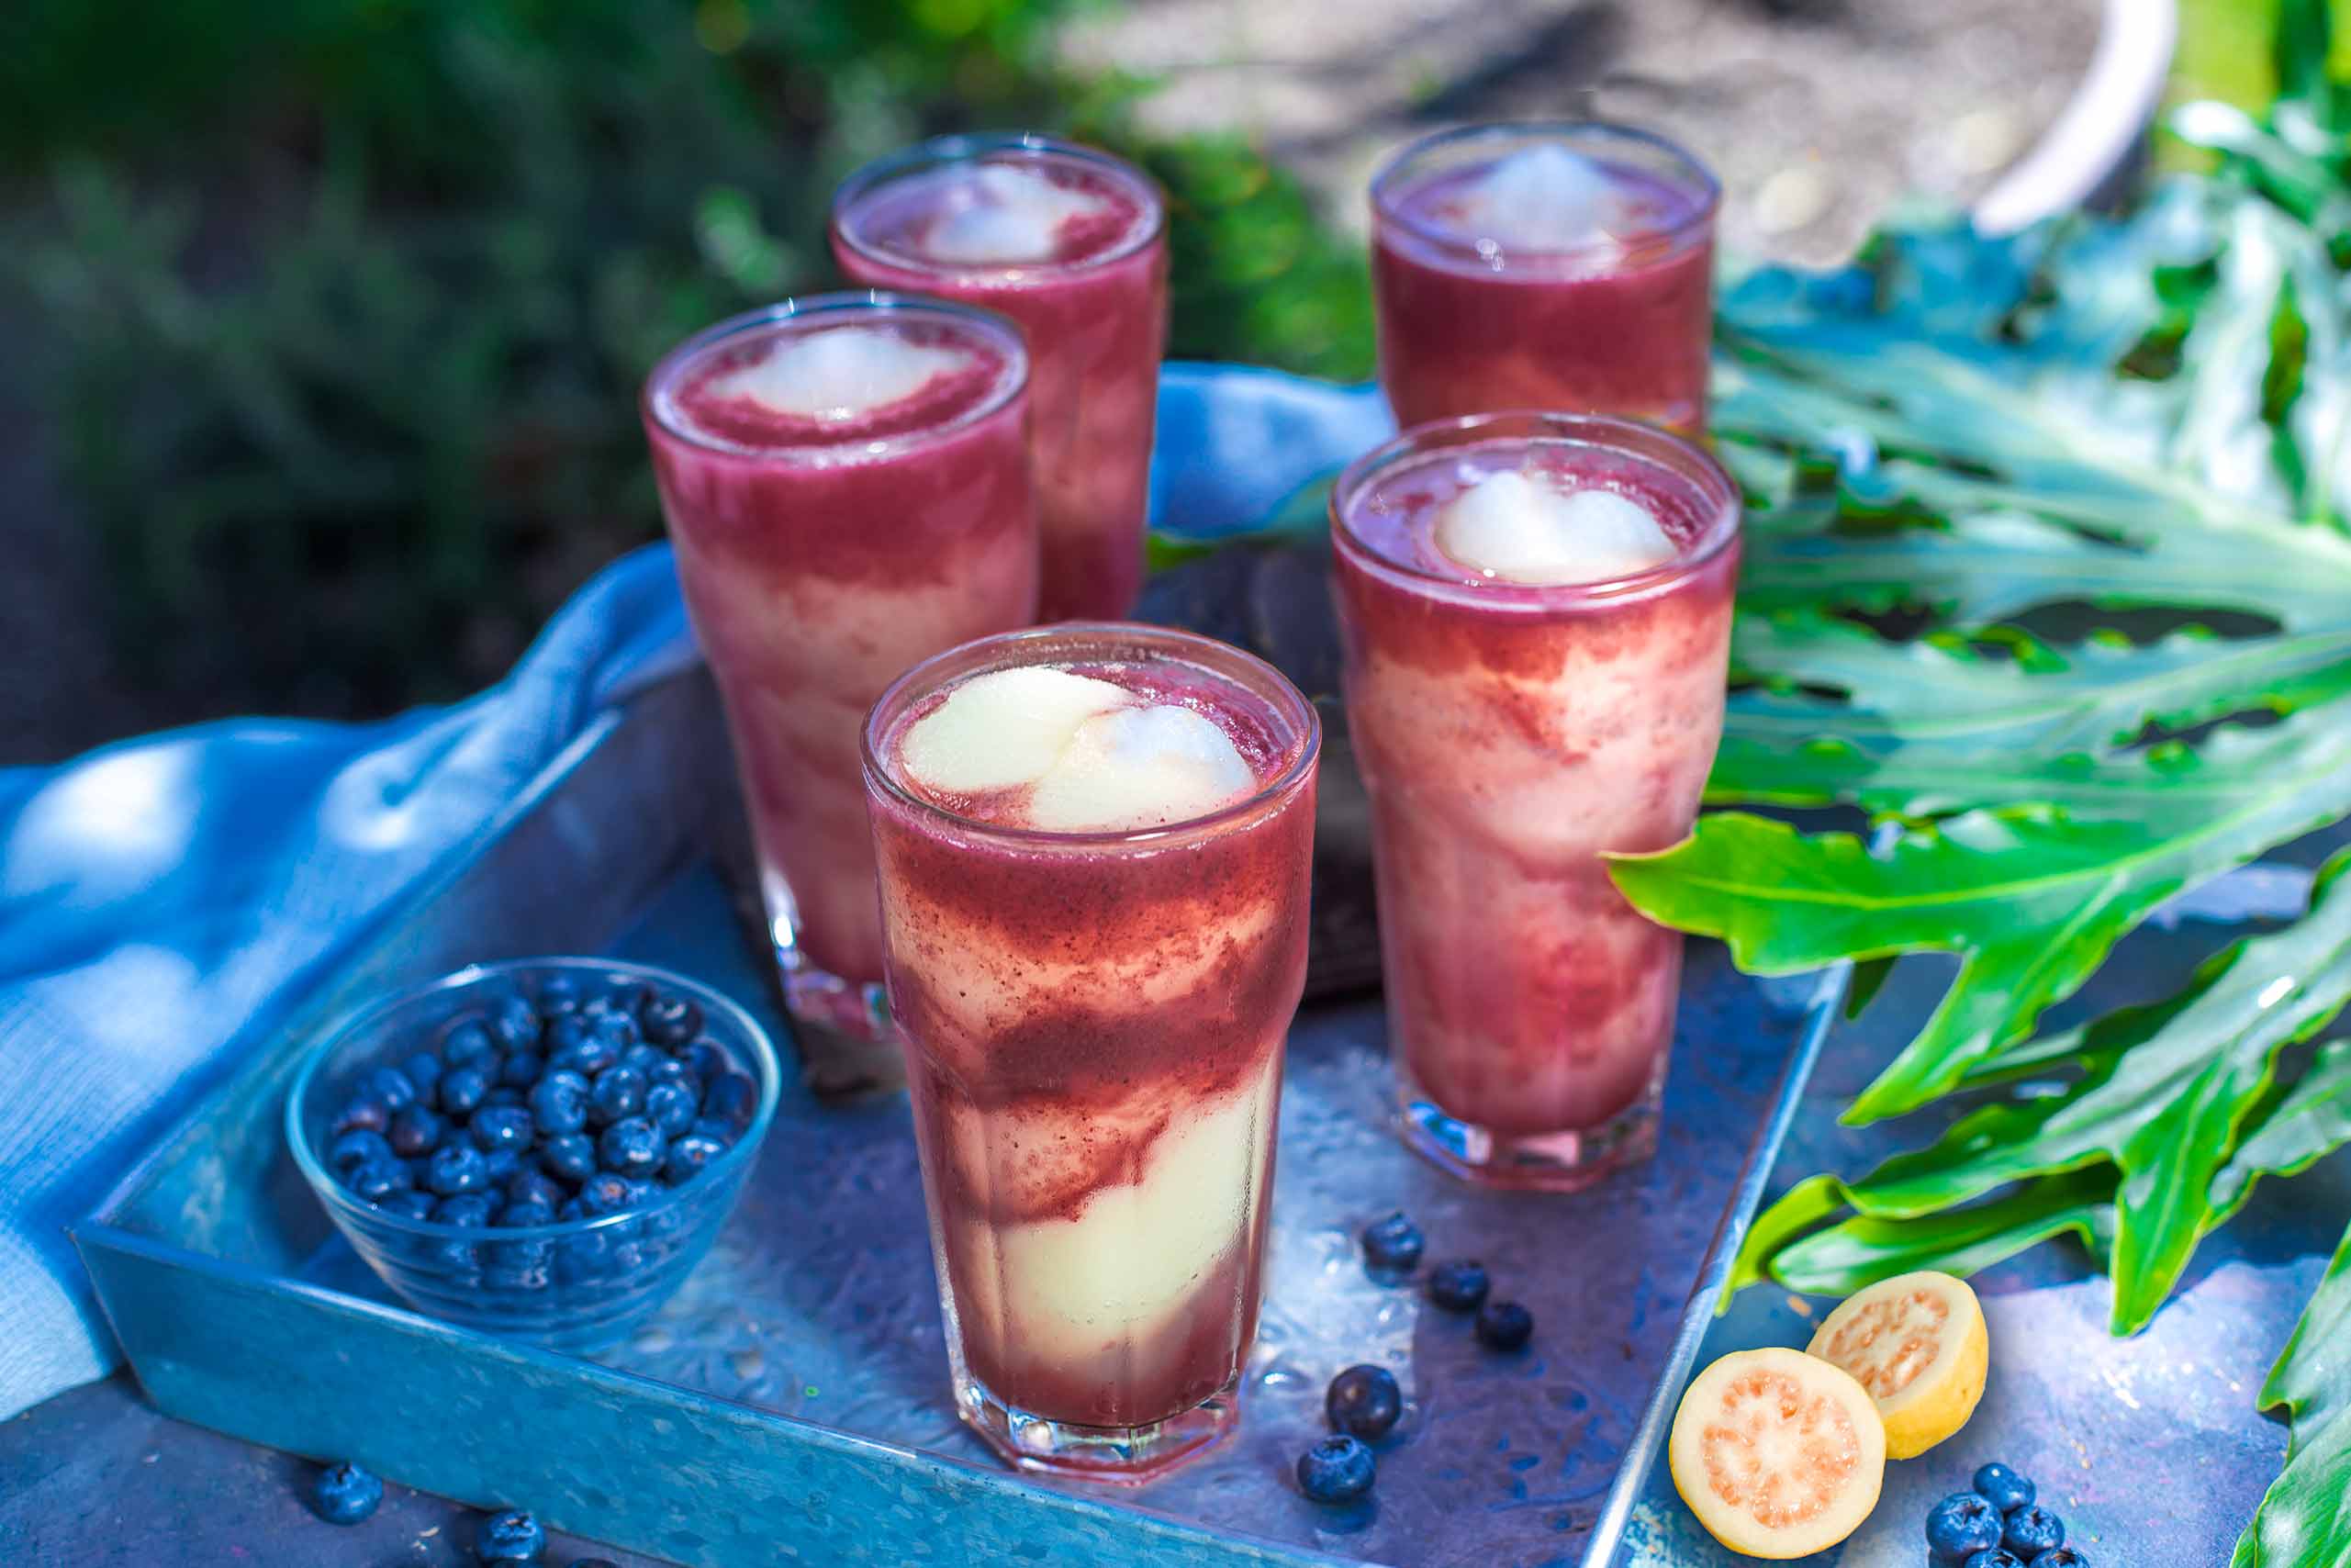 Five glasses filled with our Bacardi Blueberry Guava Swirl margaritas. Shown on our garden patio.